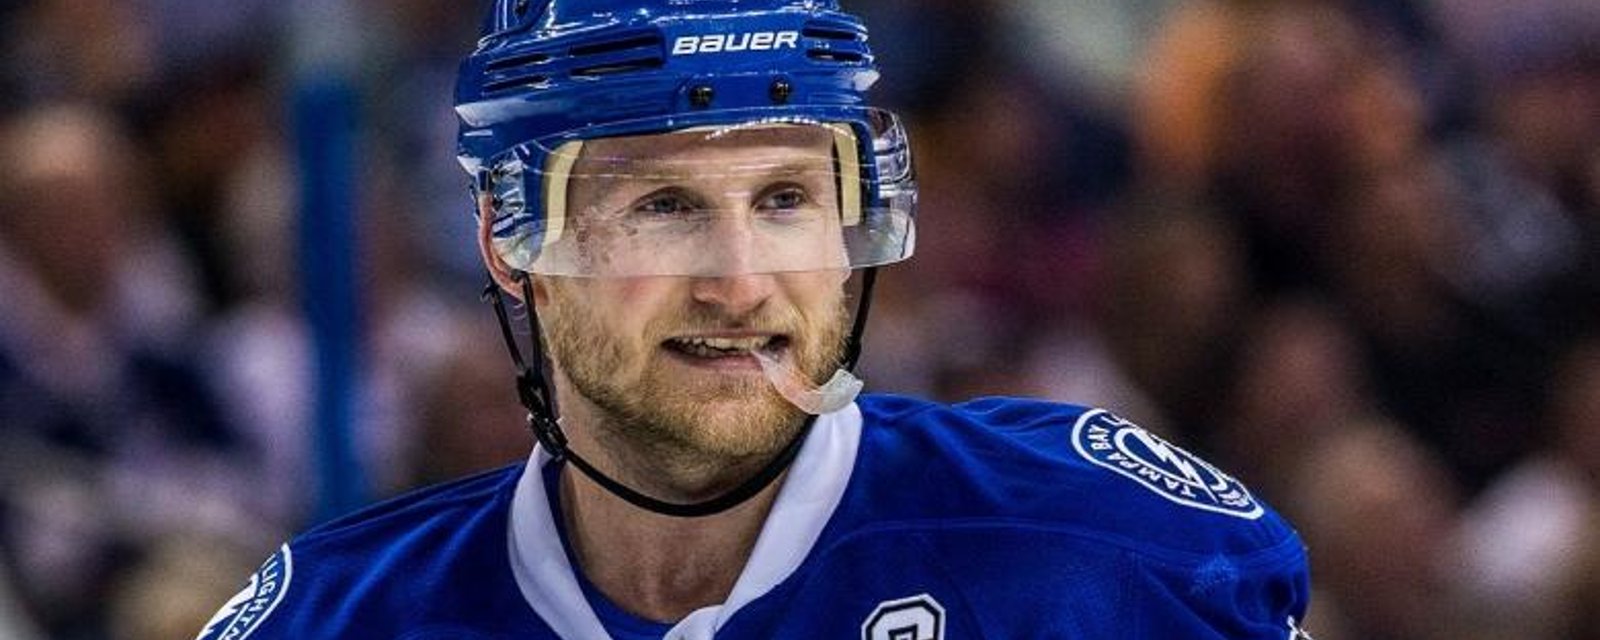 Stamkos starts off his audition with a bang!